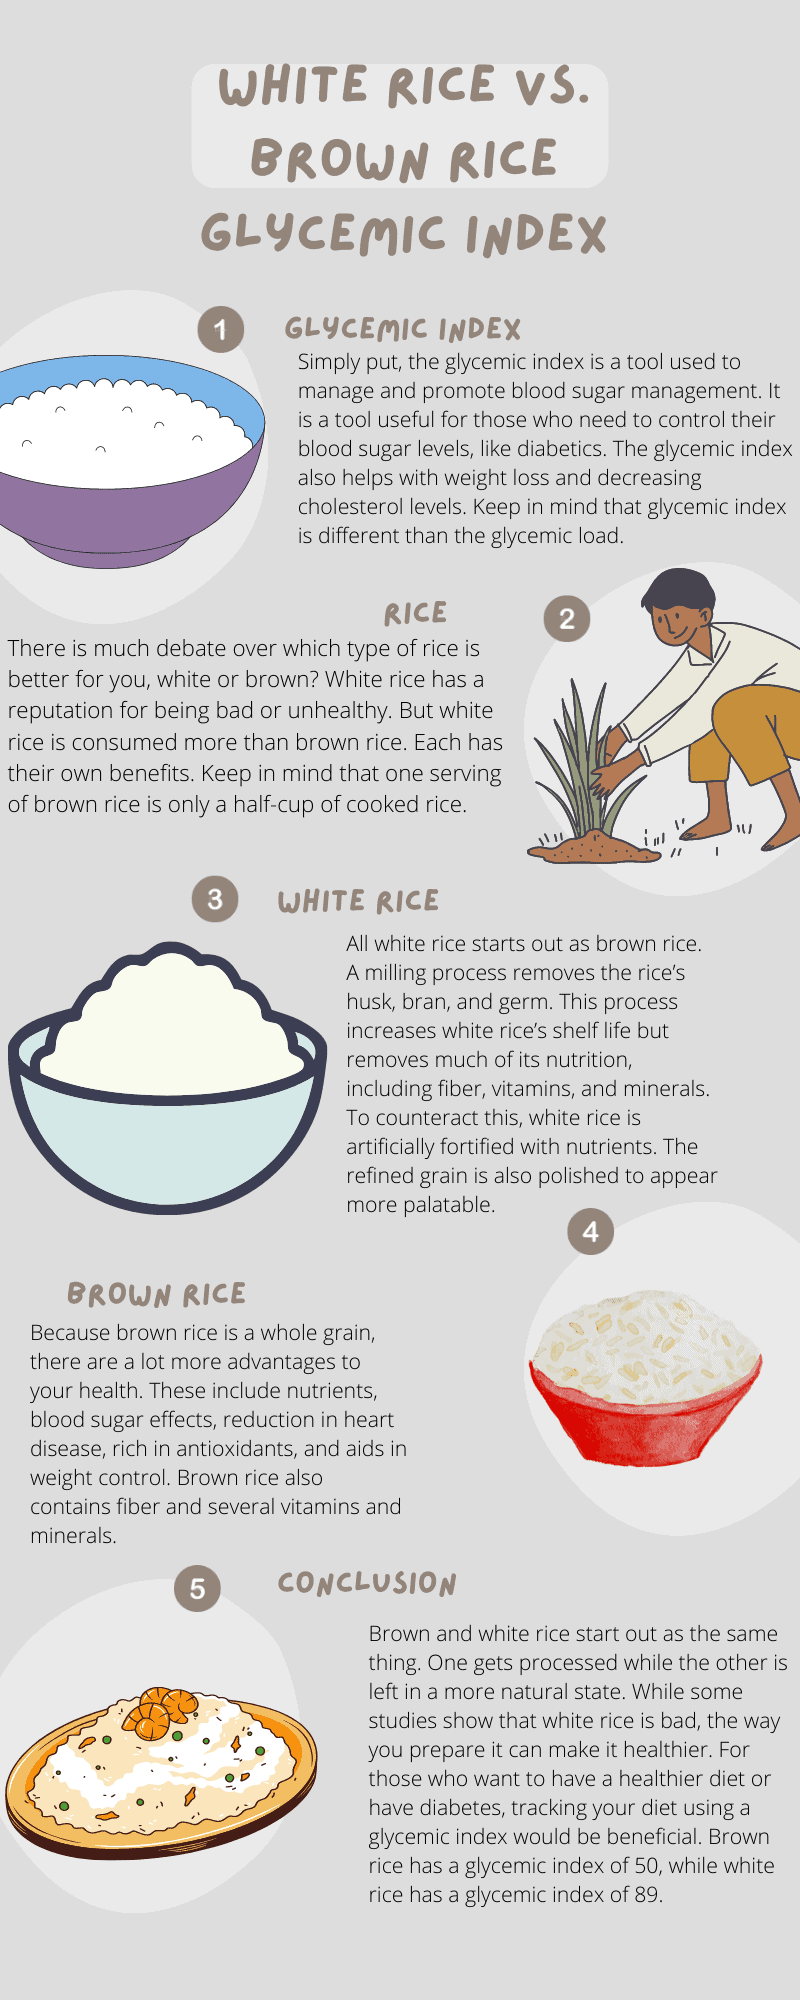 White Rice vs. Brown Rice Glycemic Index (1)